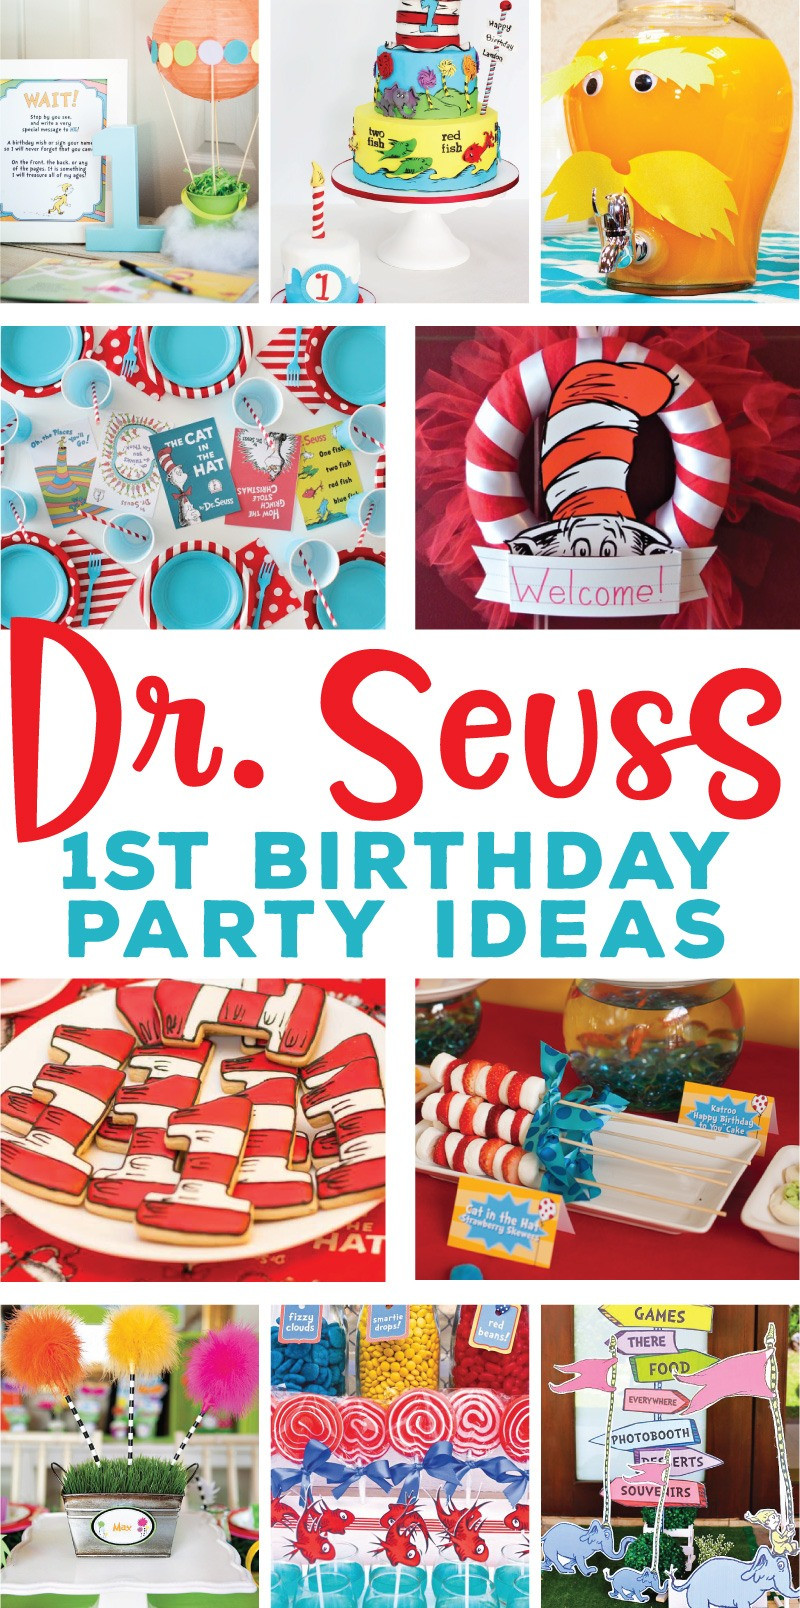 Dr Seuss Party Supplies 1st Birthday
 The Best Dr Seuss 1st Birthday Party Ideas on Love the Day